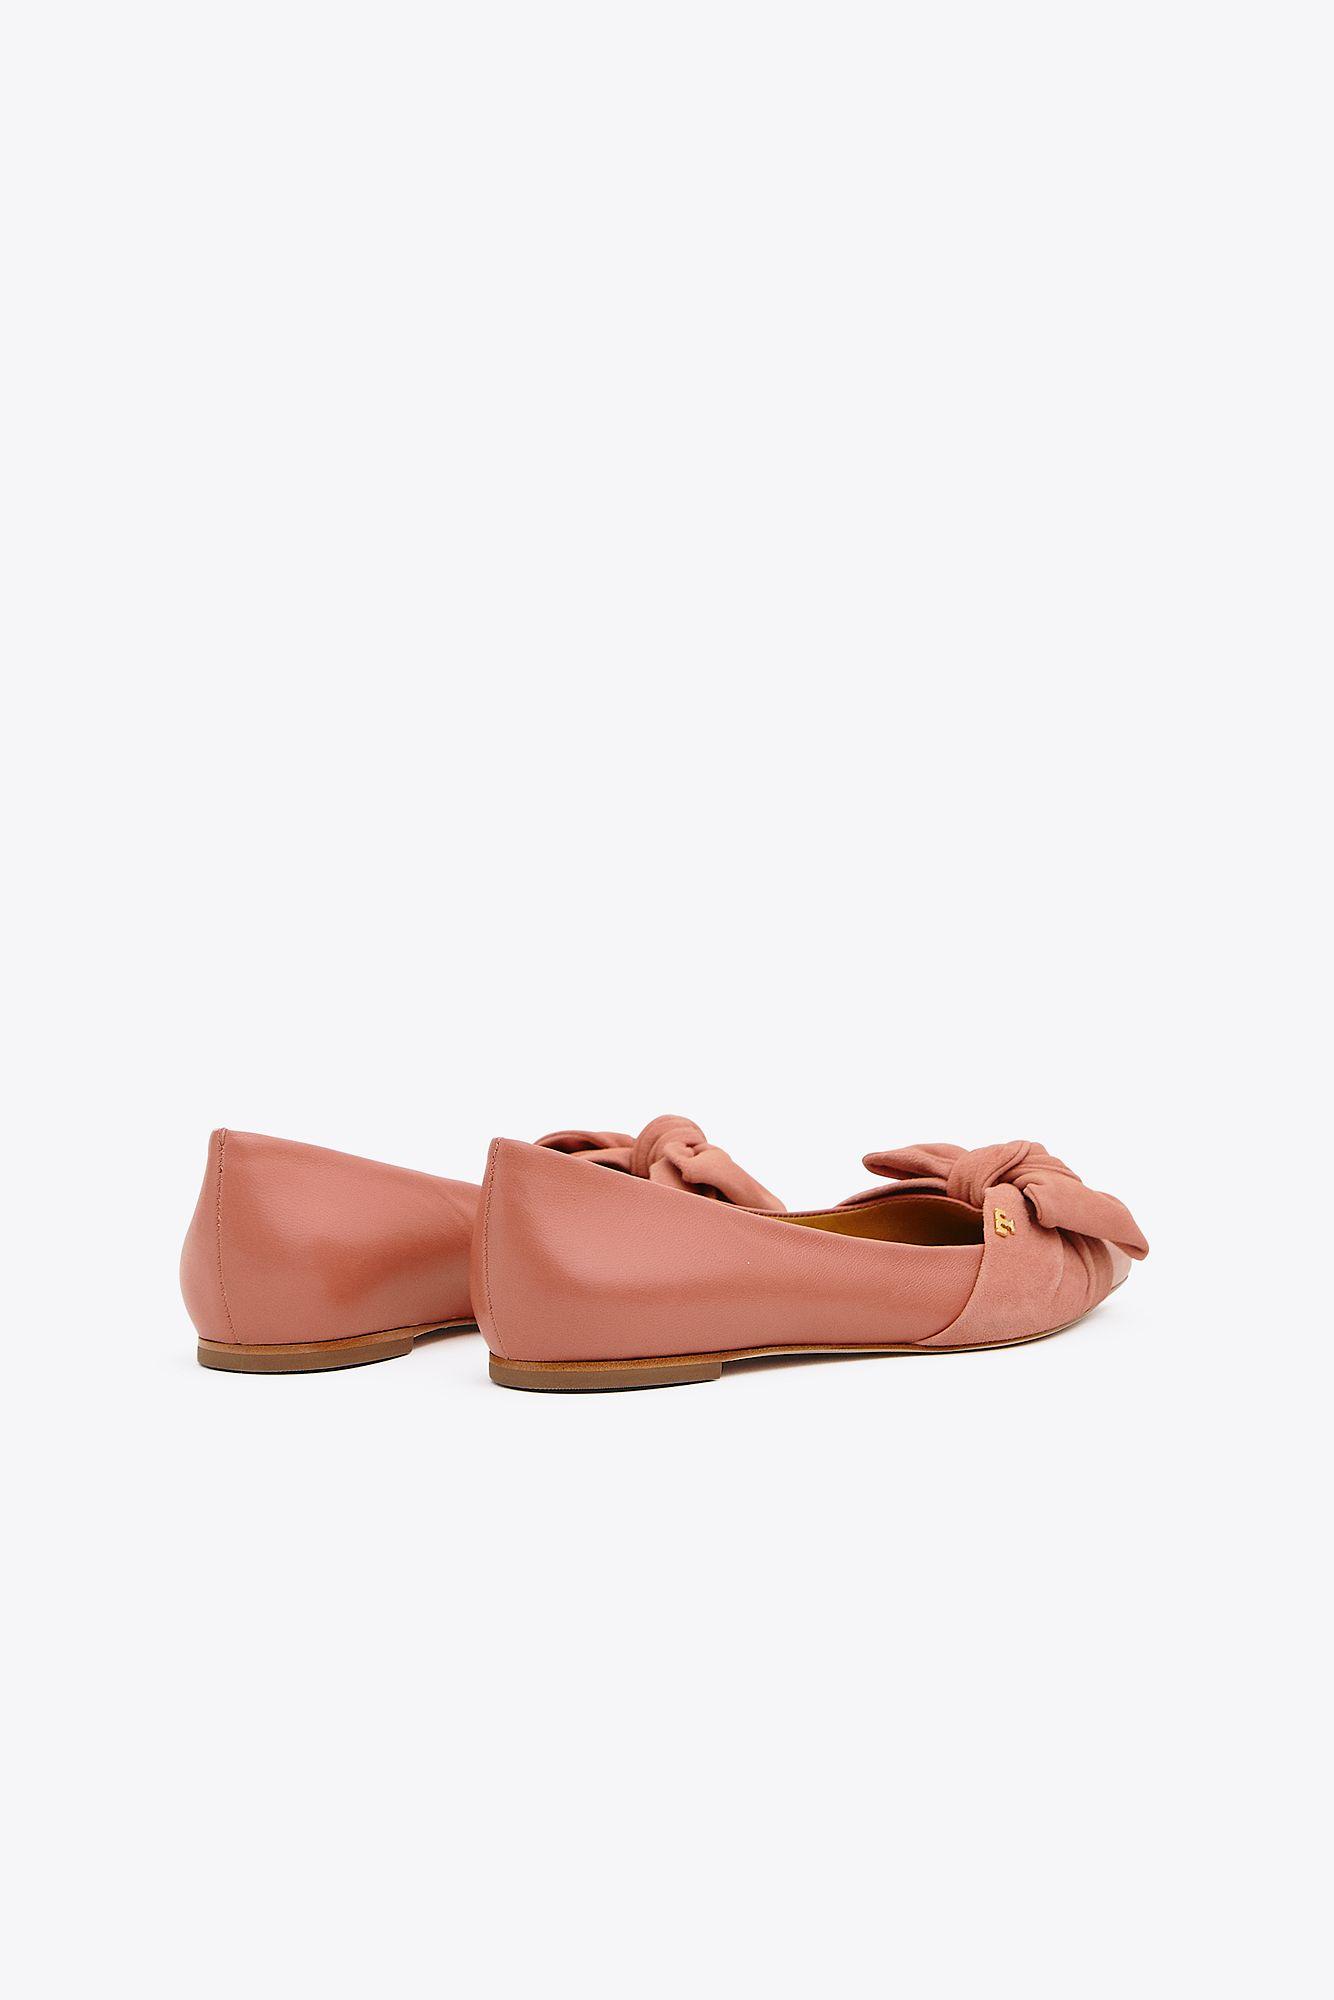 Tory Burch Leather Eleonora Slipper in Pink - Save 72% White Womens Flats and flat shoes Tory Burch Flats and flat shoes 